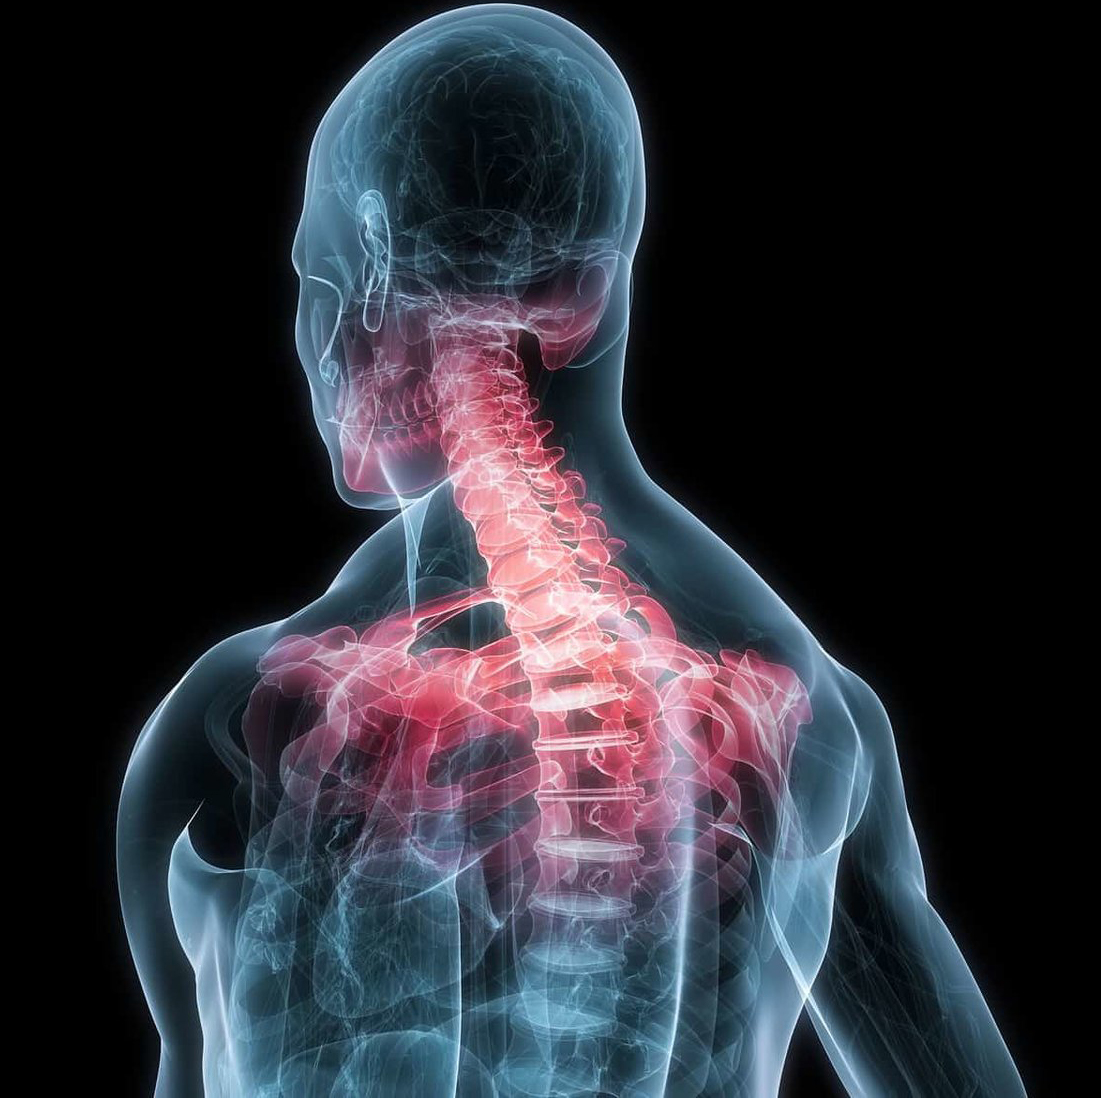 Limited Prognostic Value of Pain Duration in Non-specific Neck Pain Patients Seeking Chiropractic Care